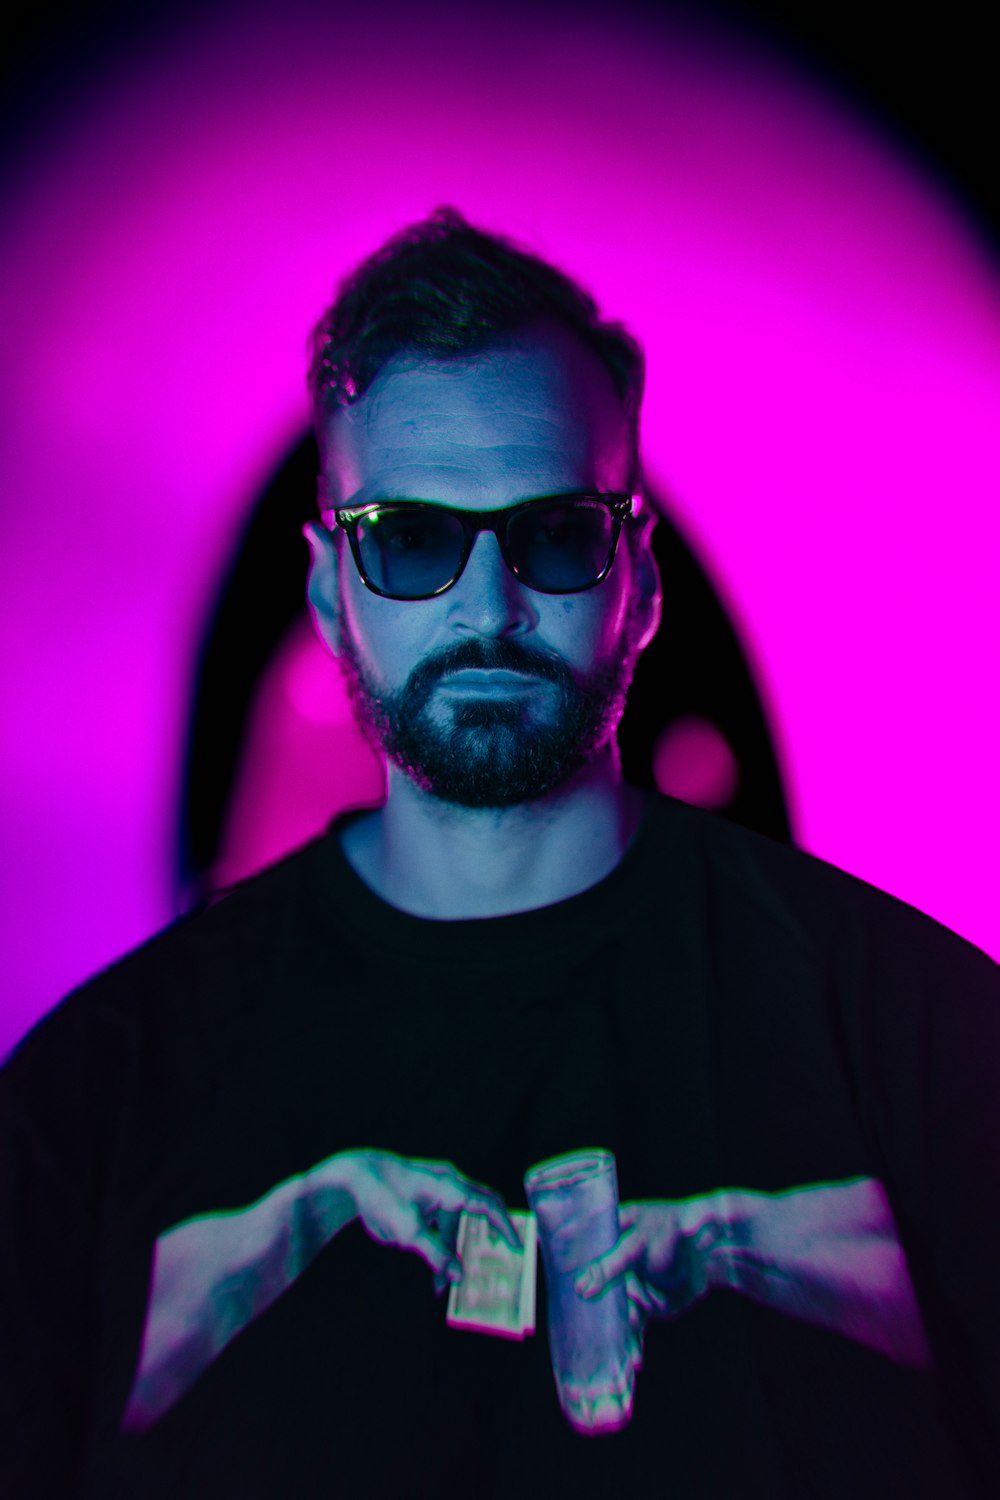 a man with a beard wearing sunglasses and a black t - shirt